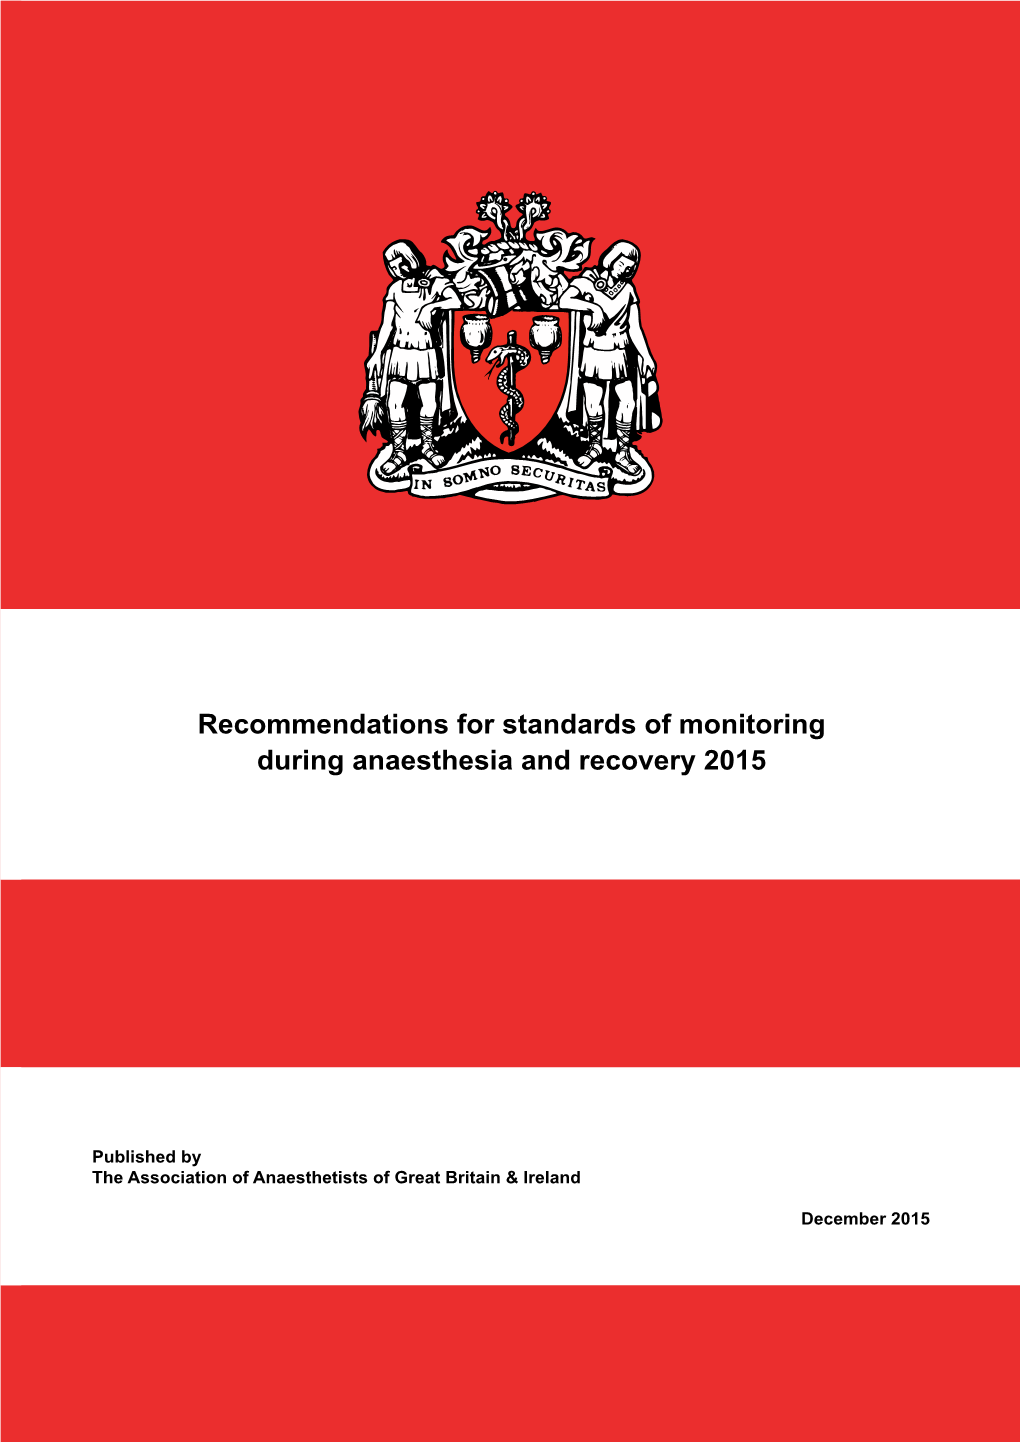 Recommendations for Standards of Monitoring in Anaesthesia And